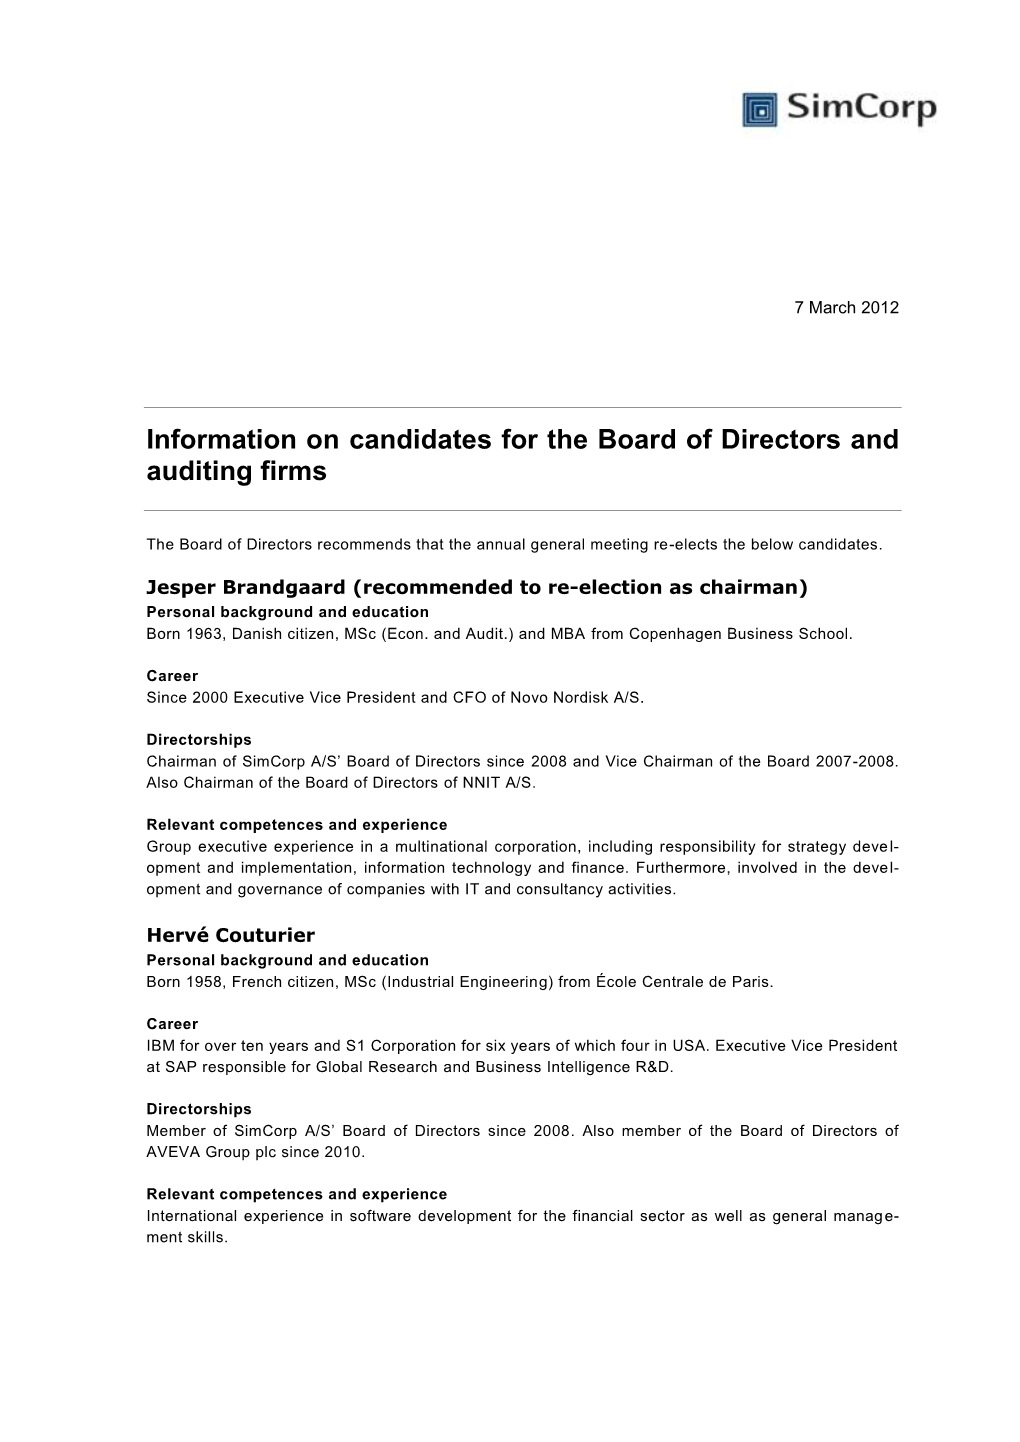 Information on Candidates for the Board of Directors and Auditing Firms